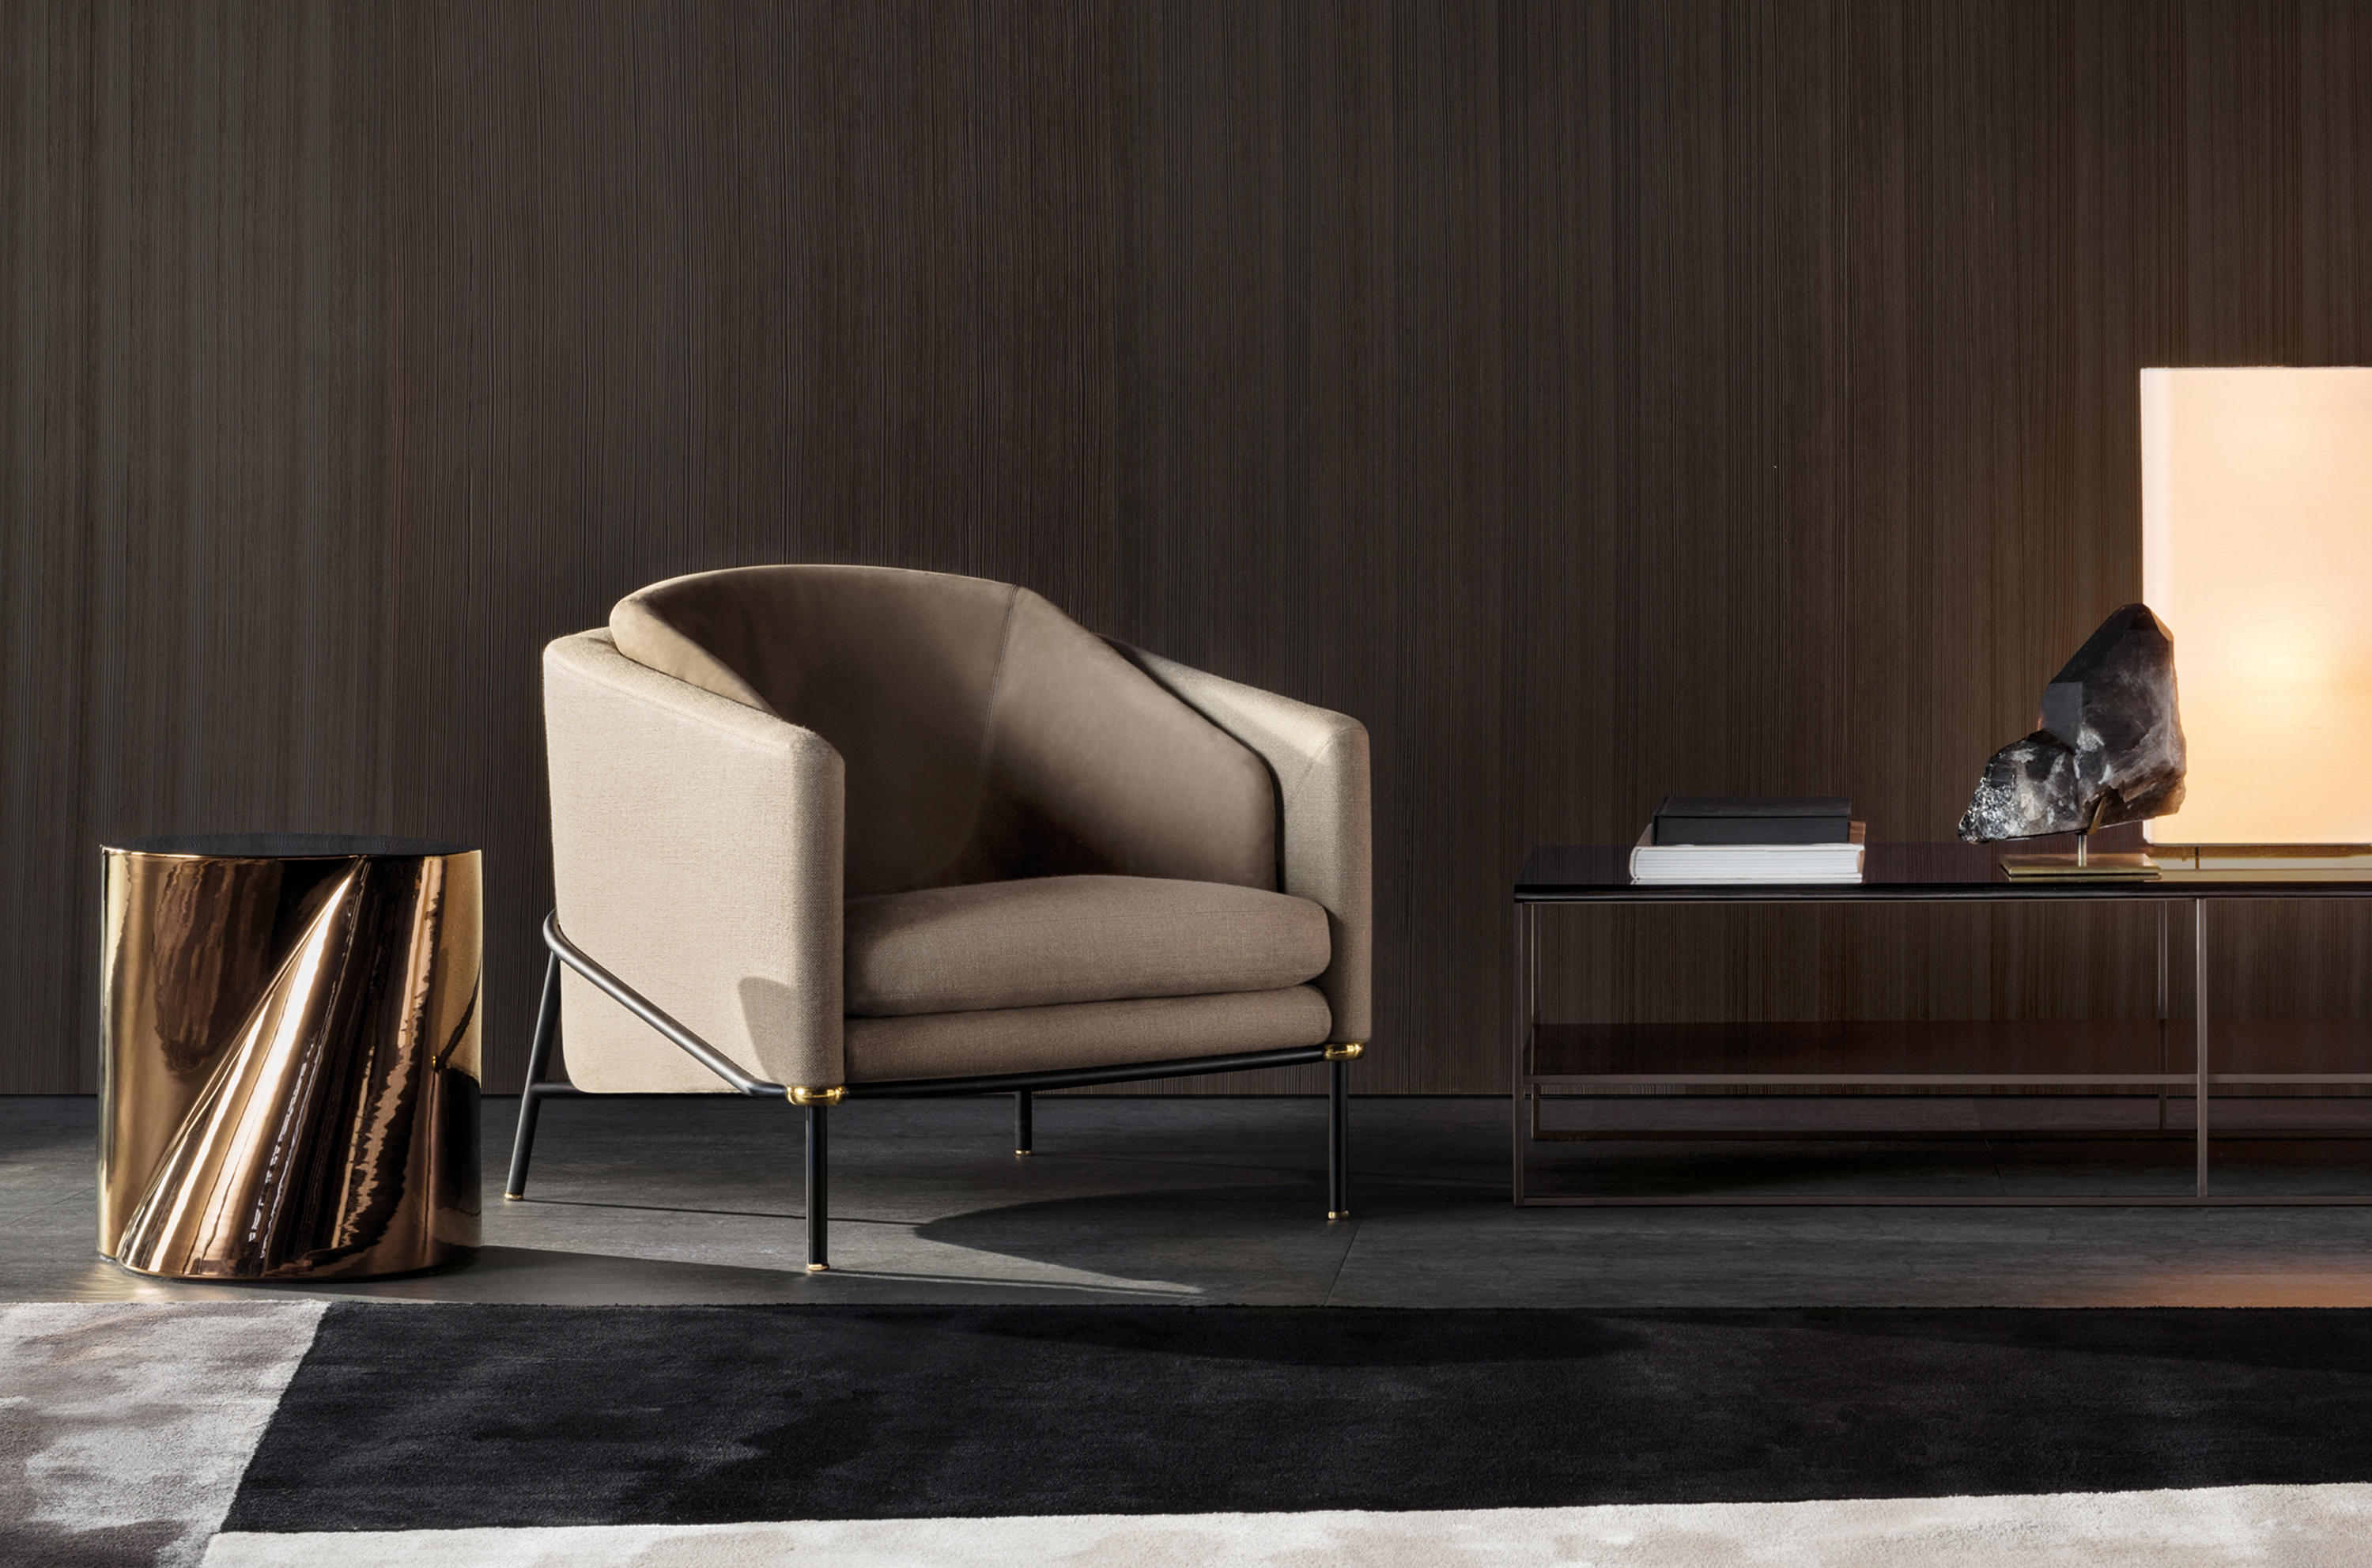 Noor Coffee Table by Christophe Delcourt for Minotti